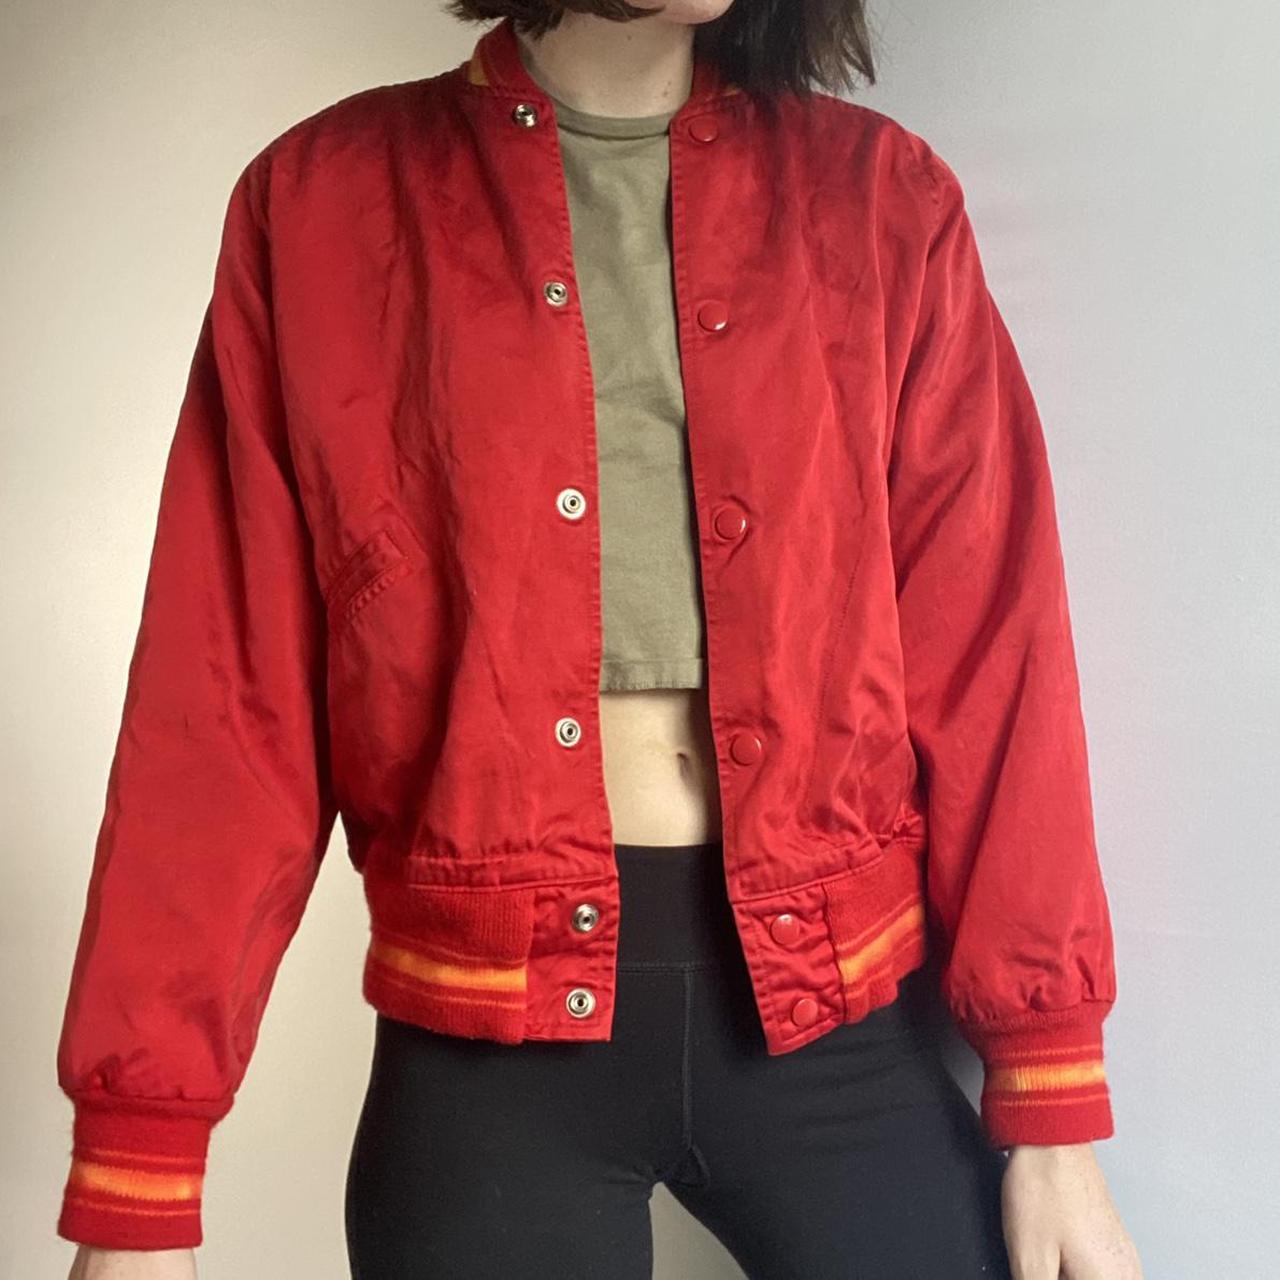 Women's Red and Yellow Jacket (3)